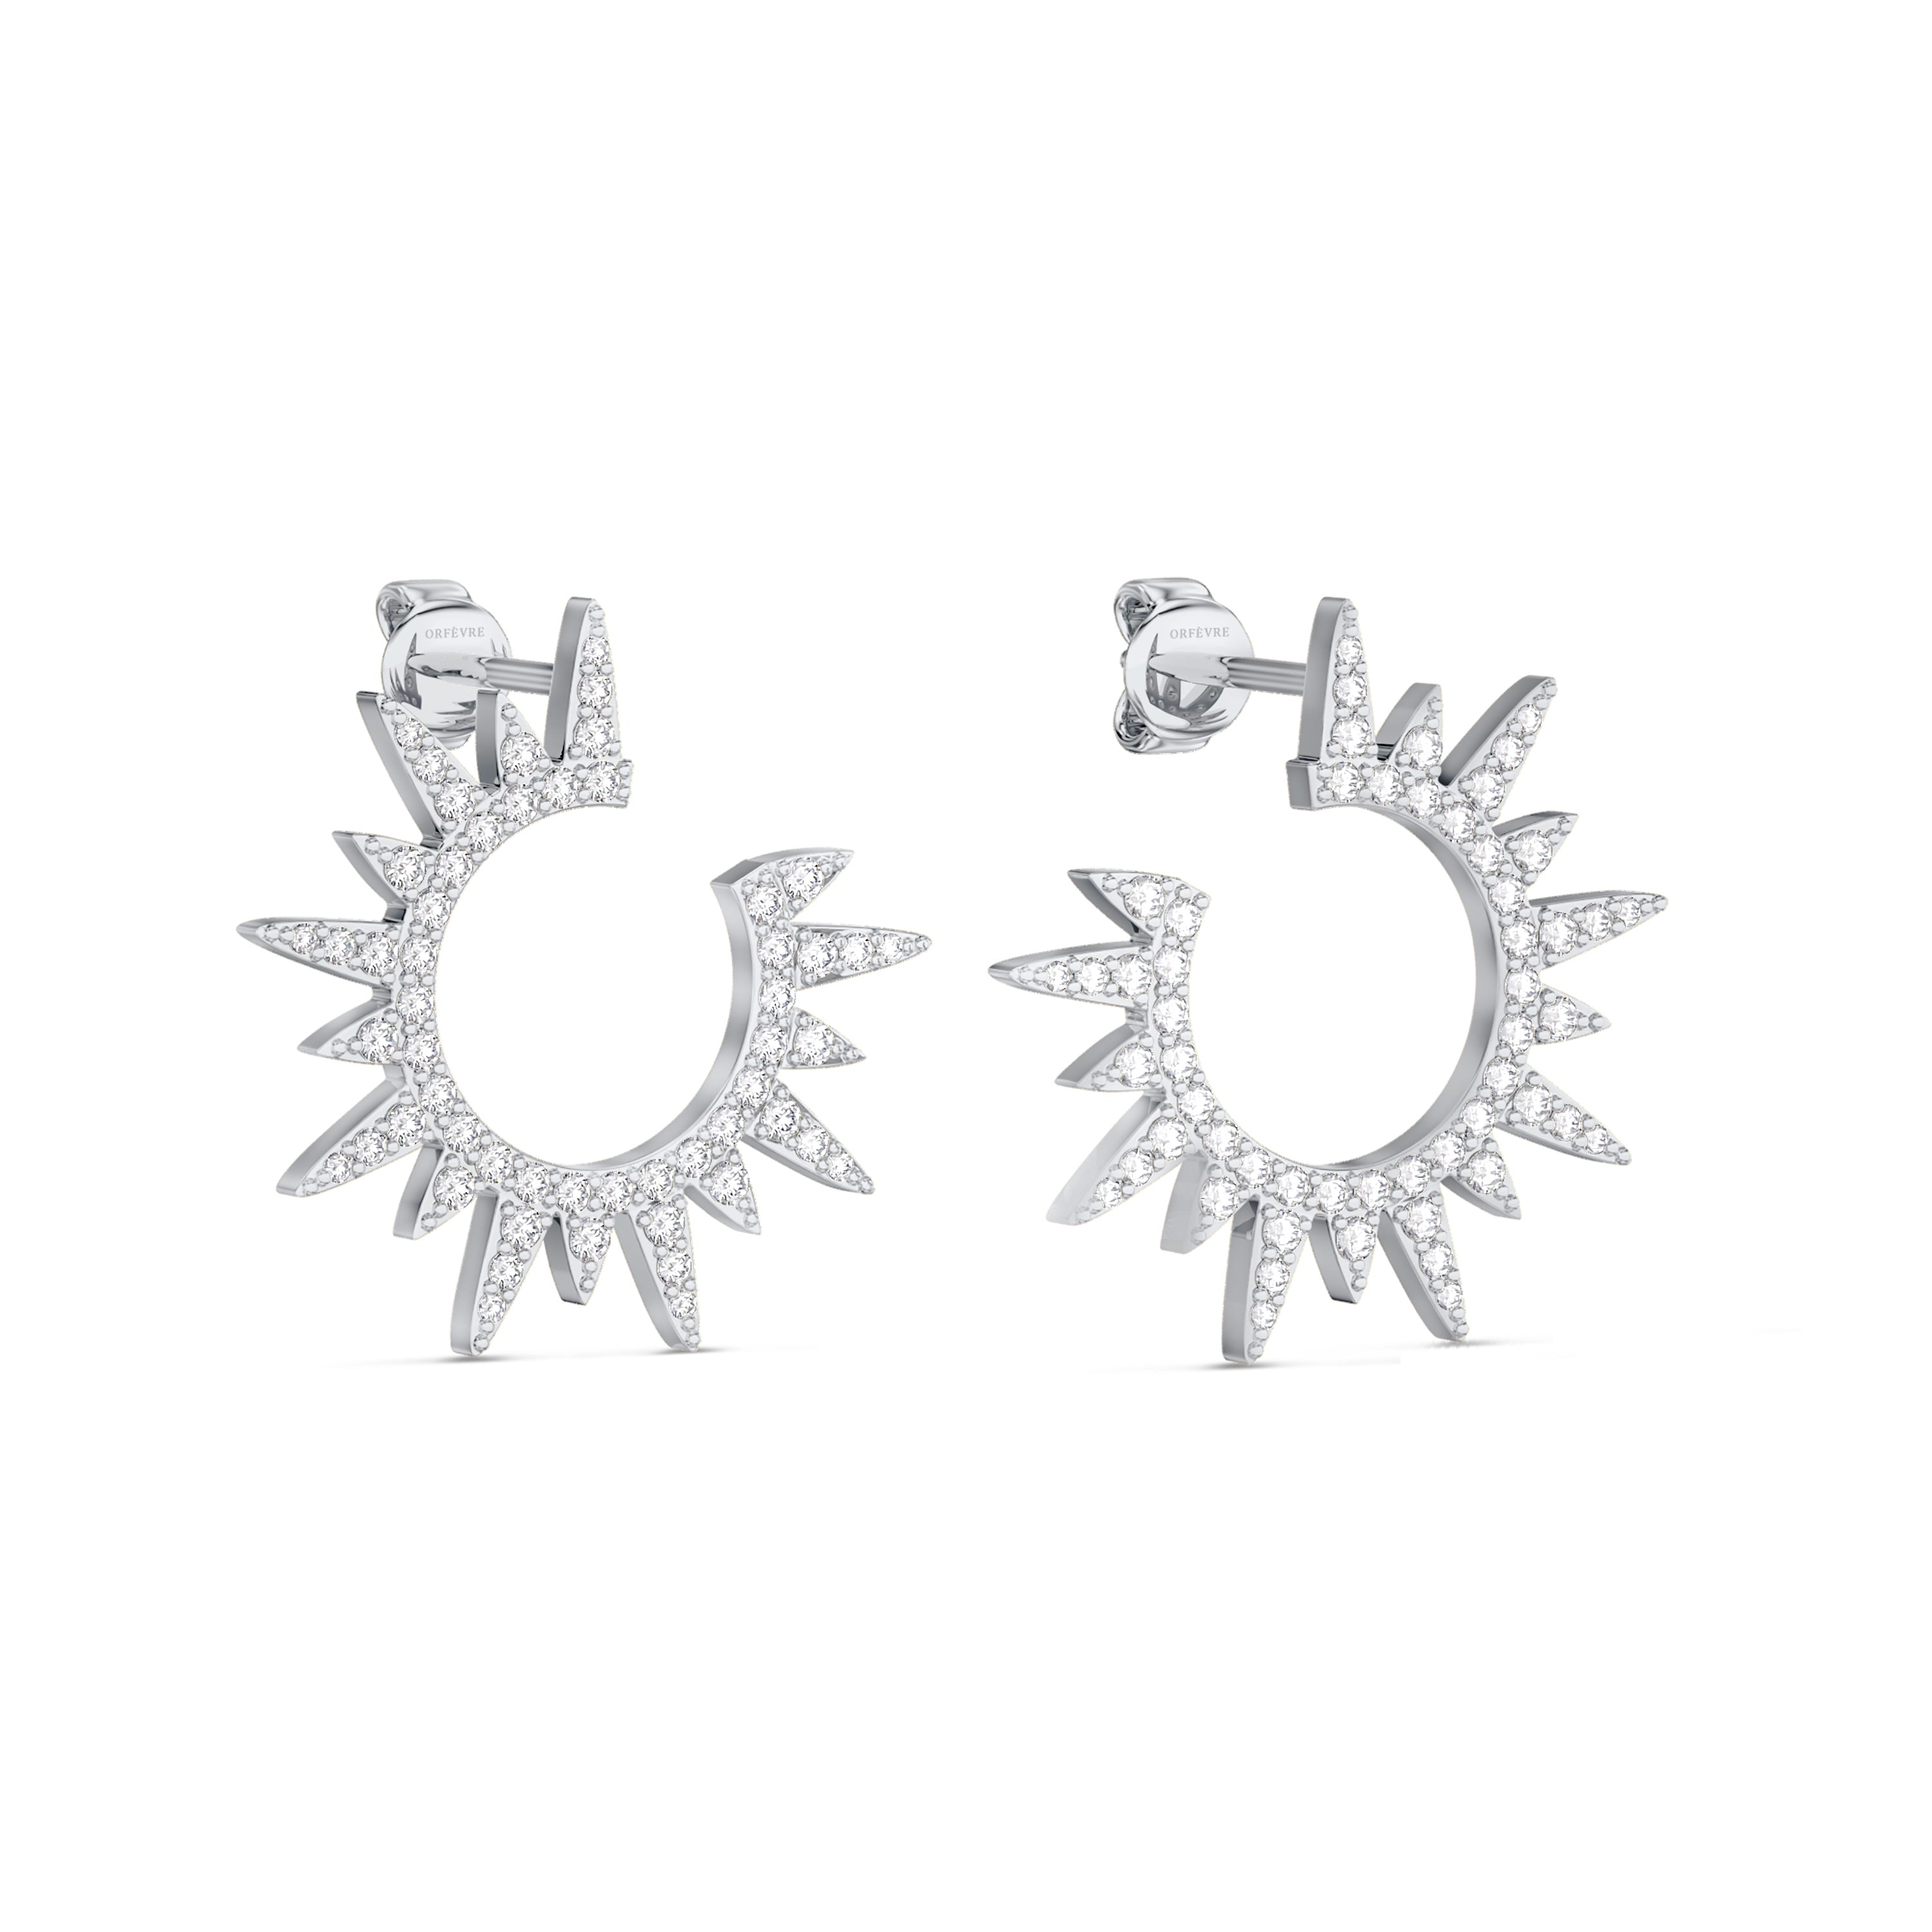 Starburst diamond earrings in 18k white gold, 0.76 carats, FG color and SI clarity #gold_white